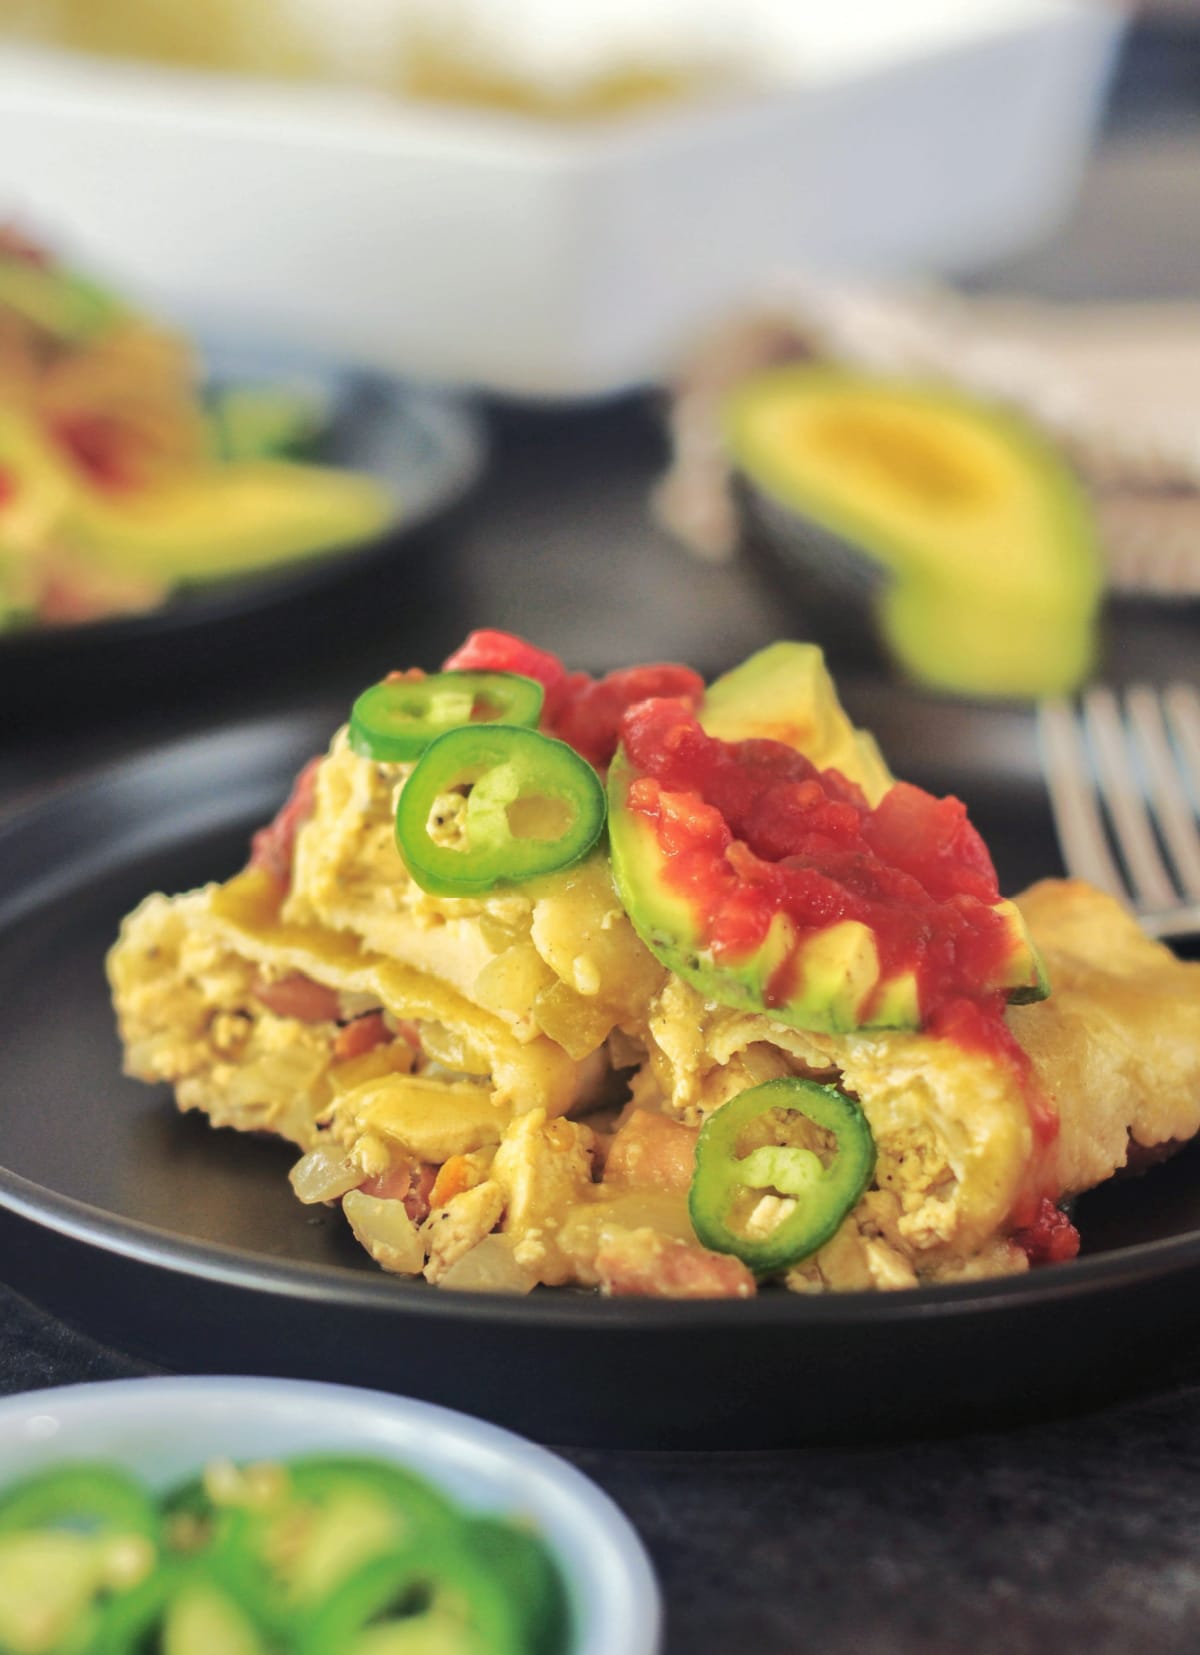 One serving of breakfast enchiladas on a matte black plate. Enchiladas are filled with a tofu scramble and beans, and garnished with sliced jalapeños, sliced avocado, and deep red salsa. A half avocado and the baking dish of enchiladas are blurred in the background.